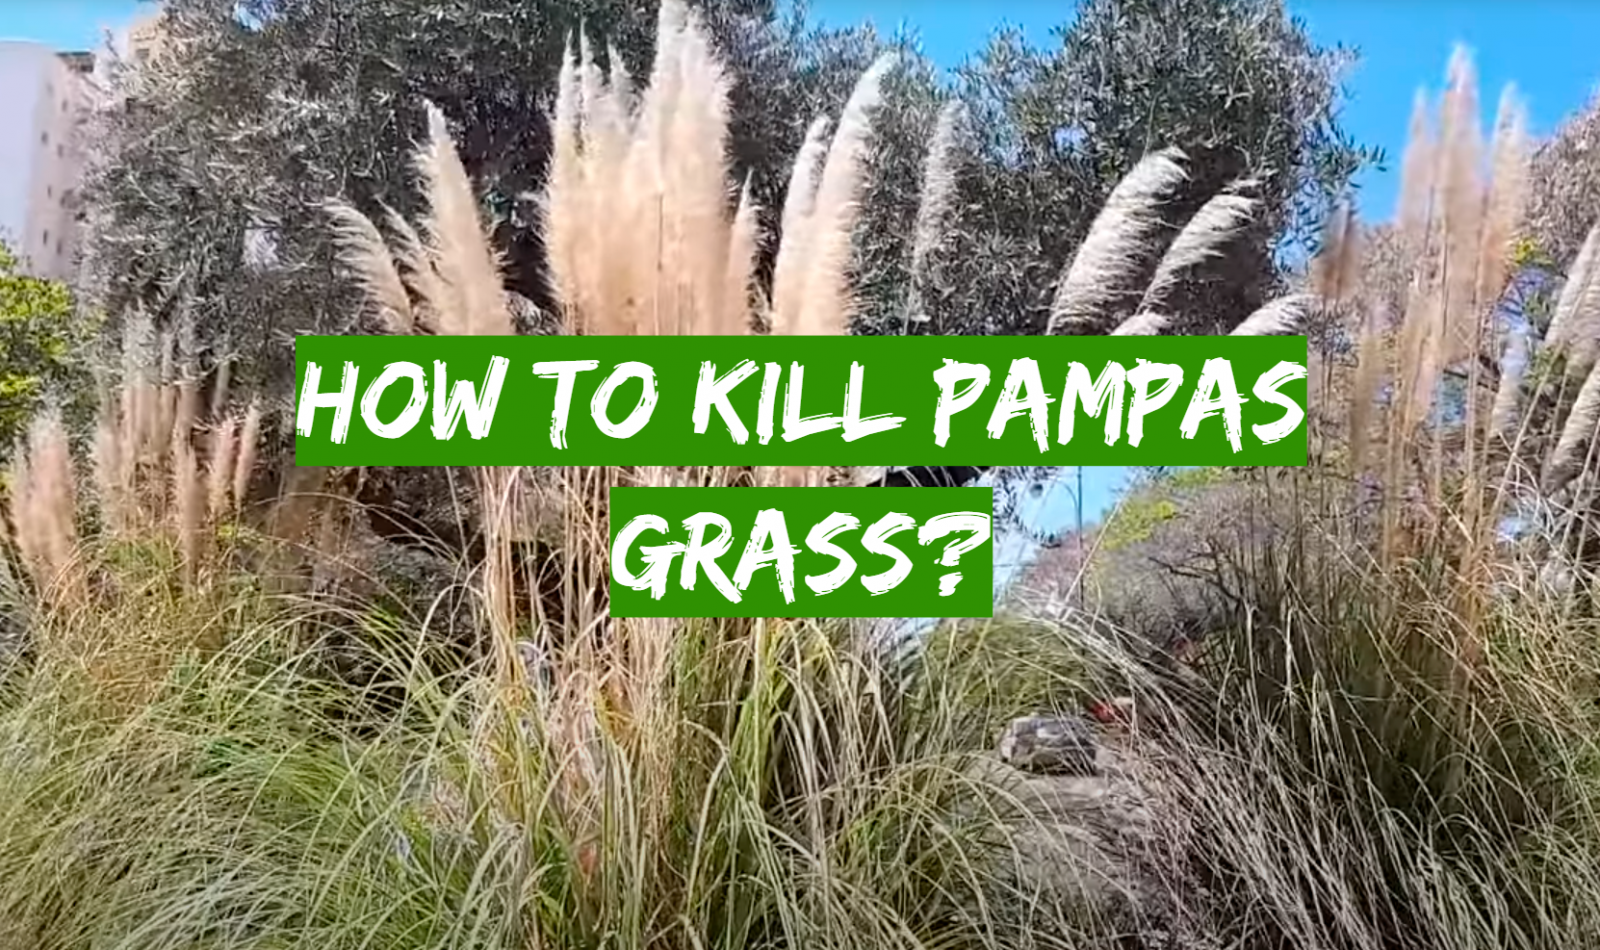 How to Kill Pampas Grass?